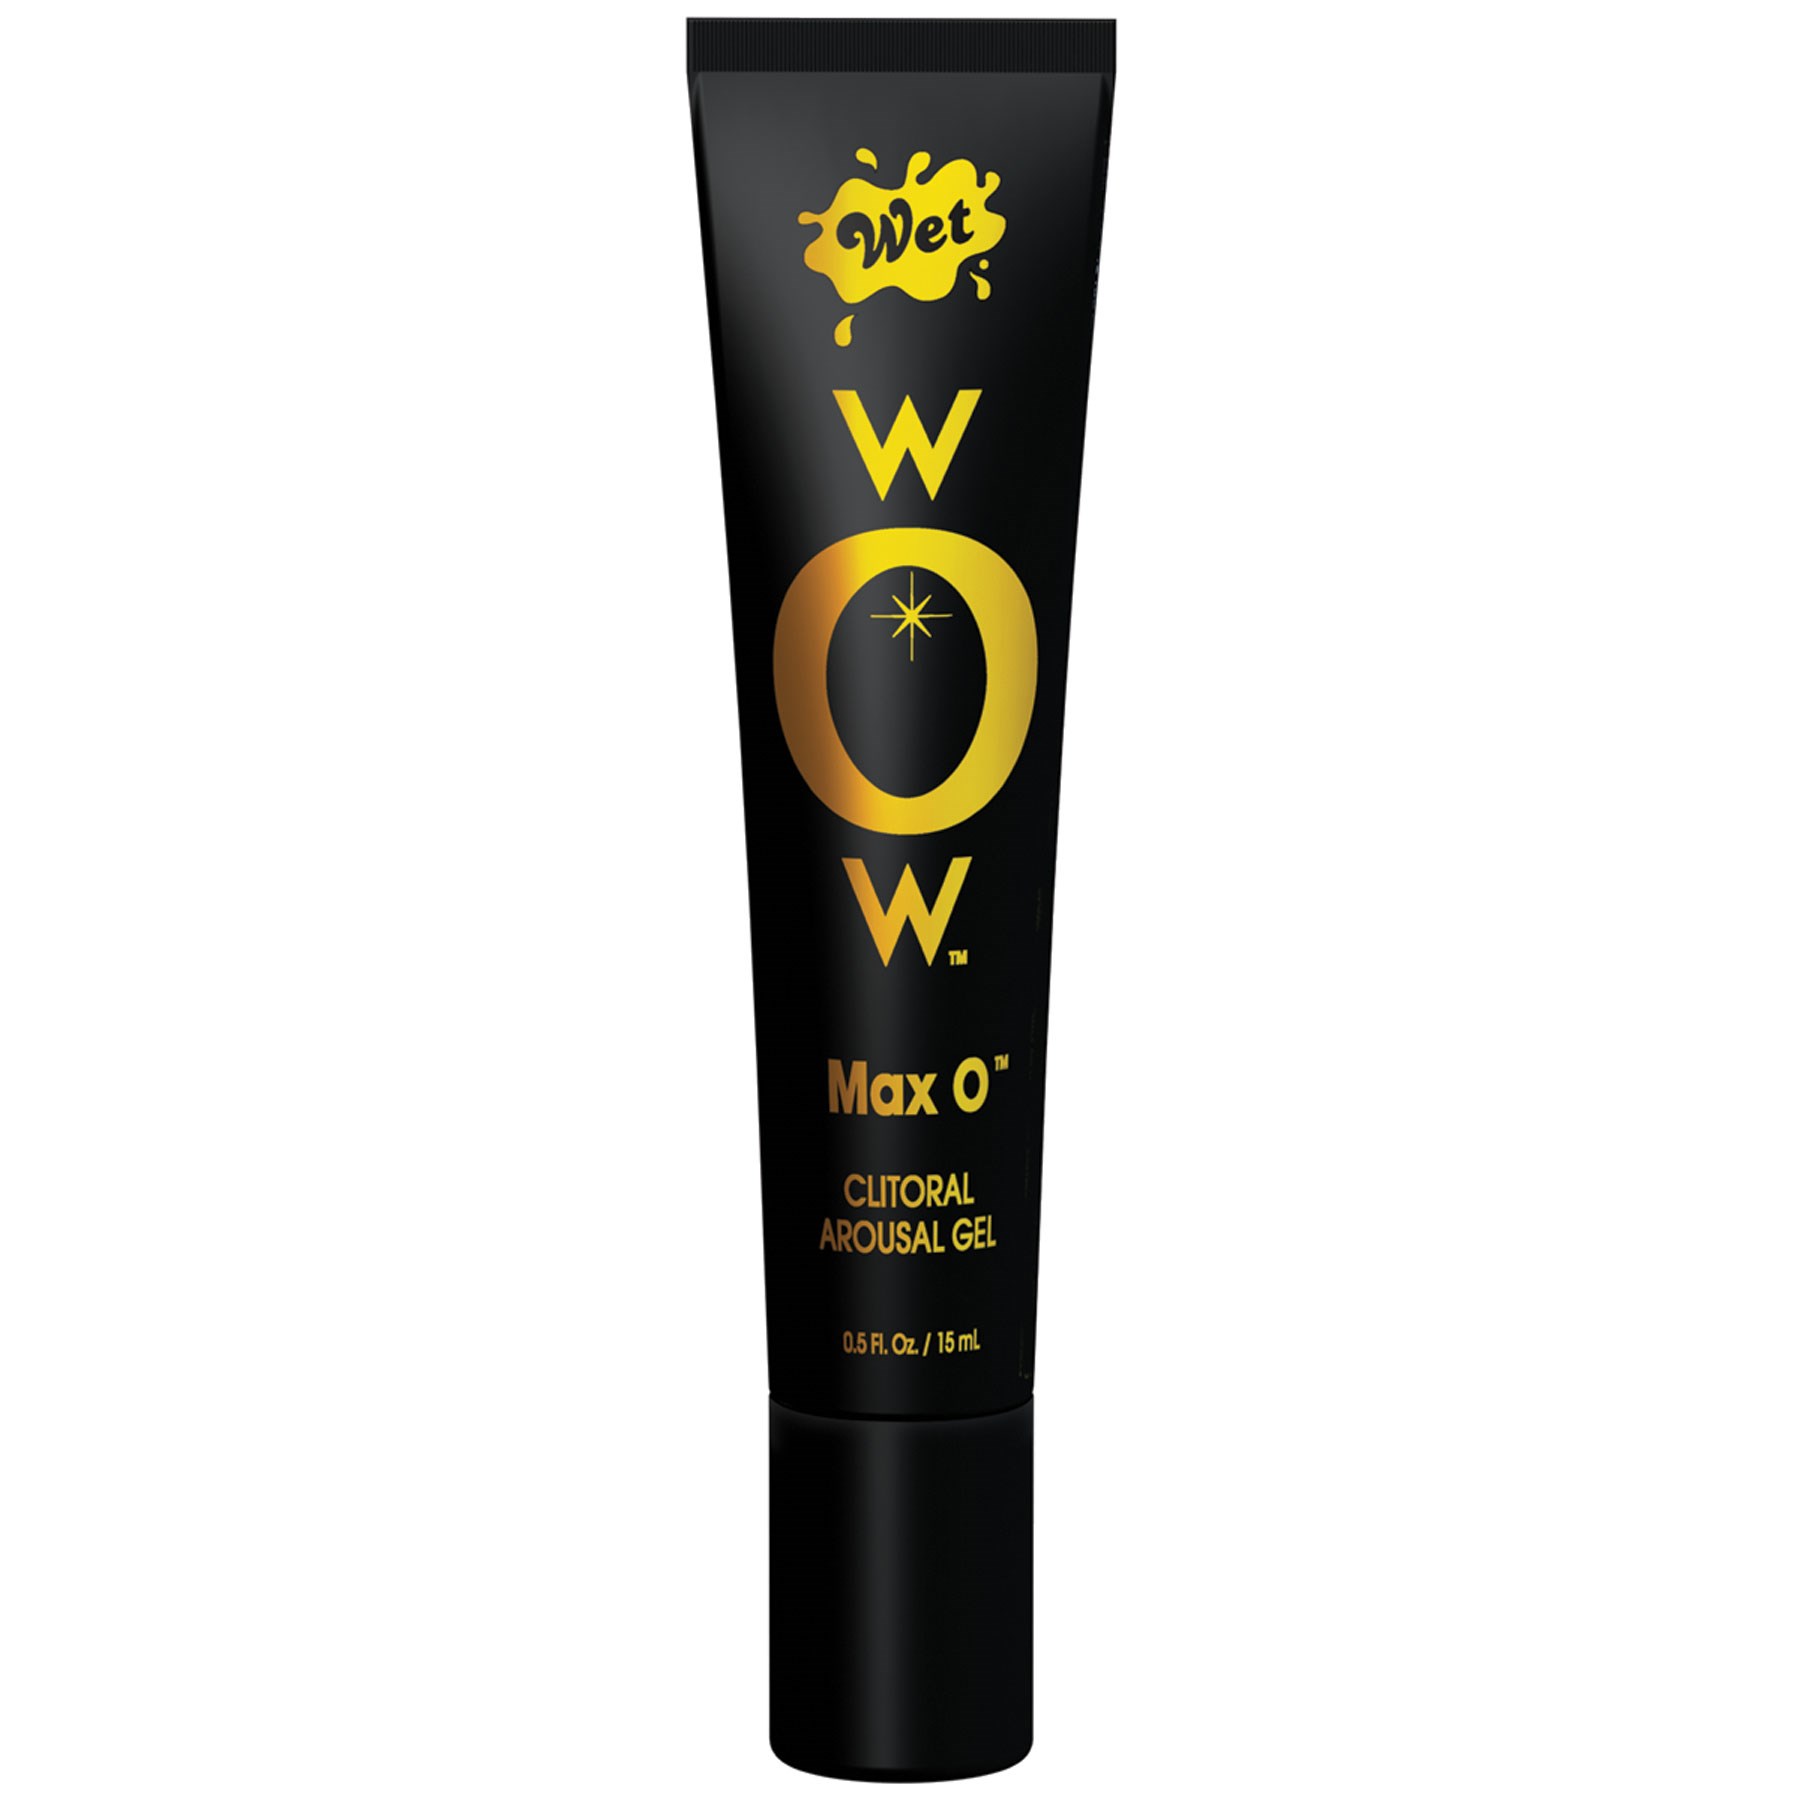 Wet Wow Max O Clitoral Arousal Gel